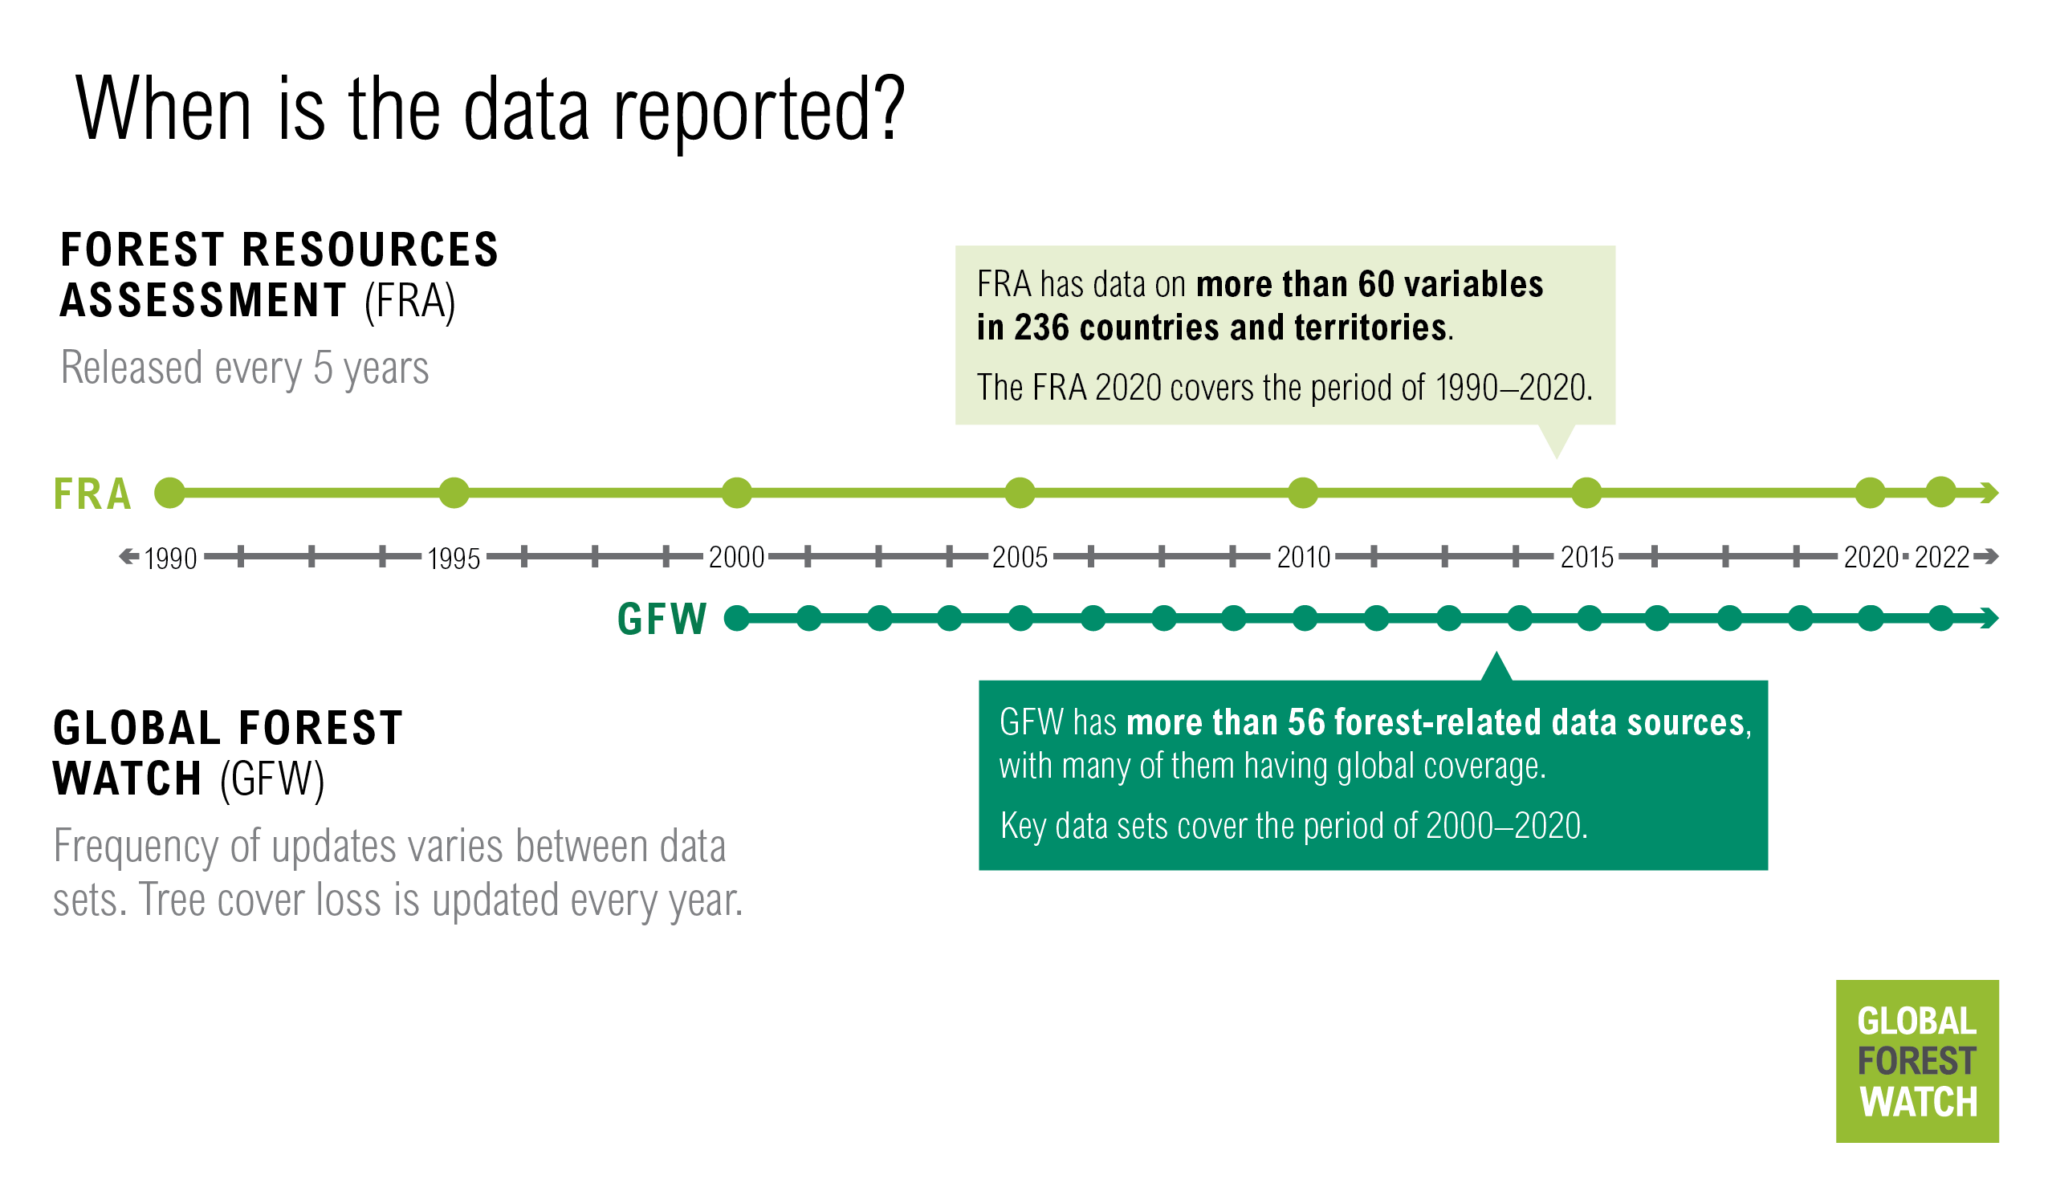 When is the data reported for GFW and FRA?